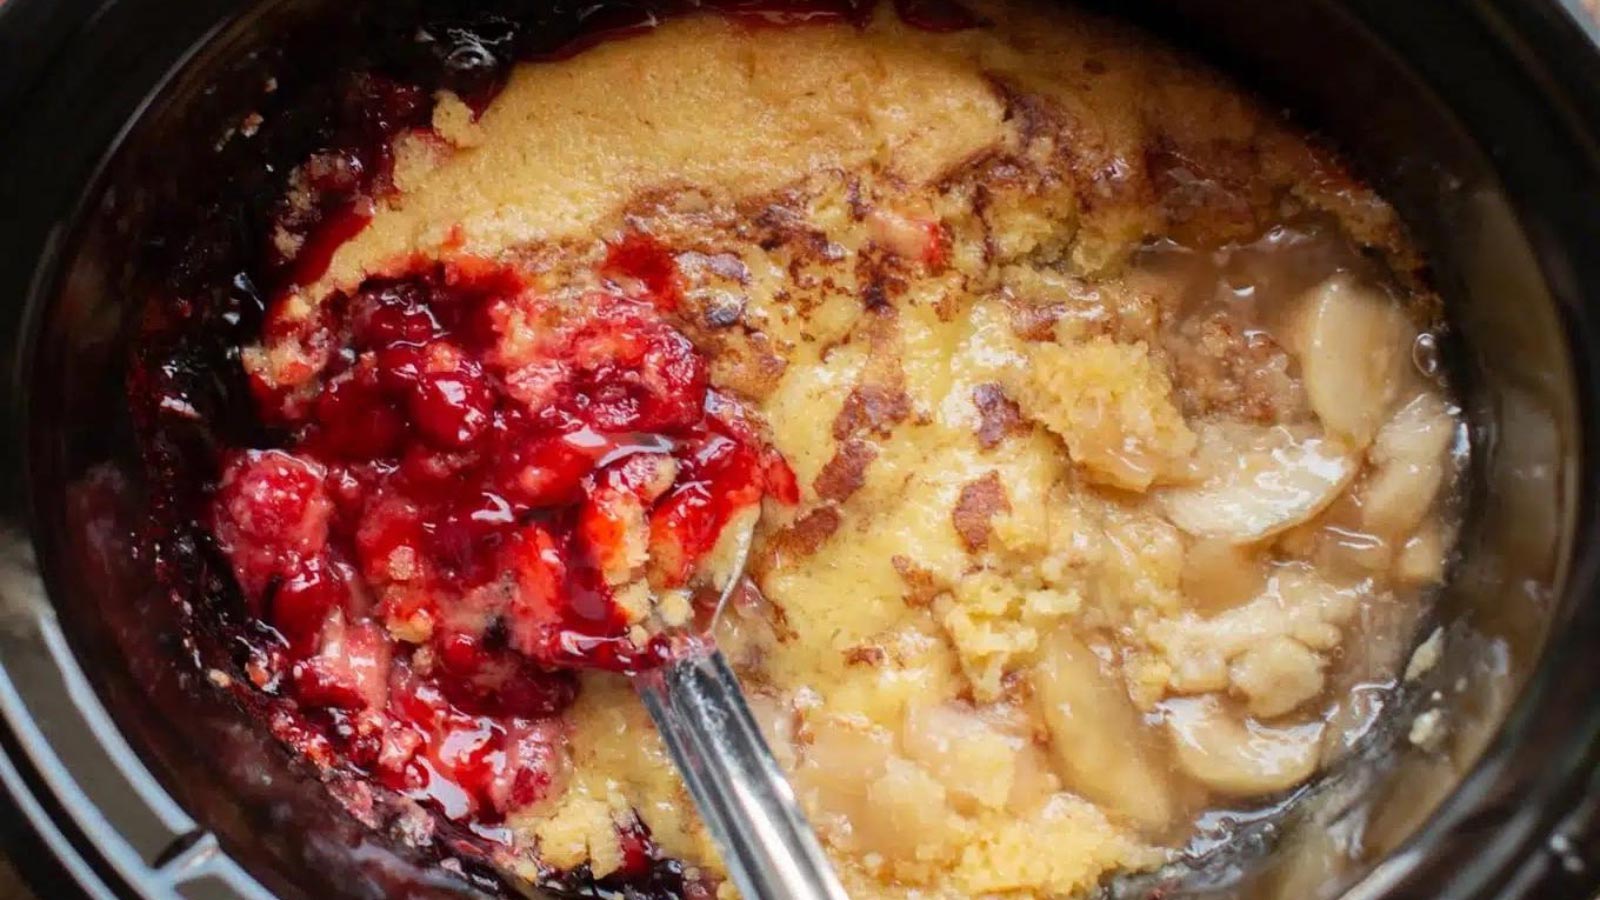 An overhead view of a slow cooker crock filled with a his and hers cobbler.